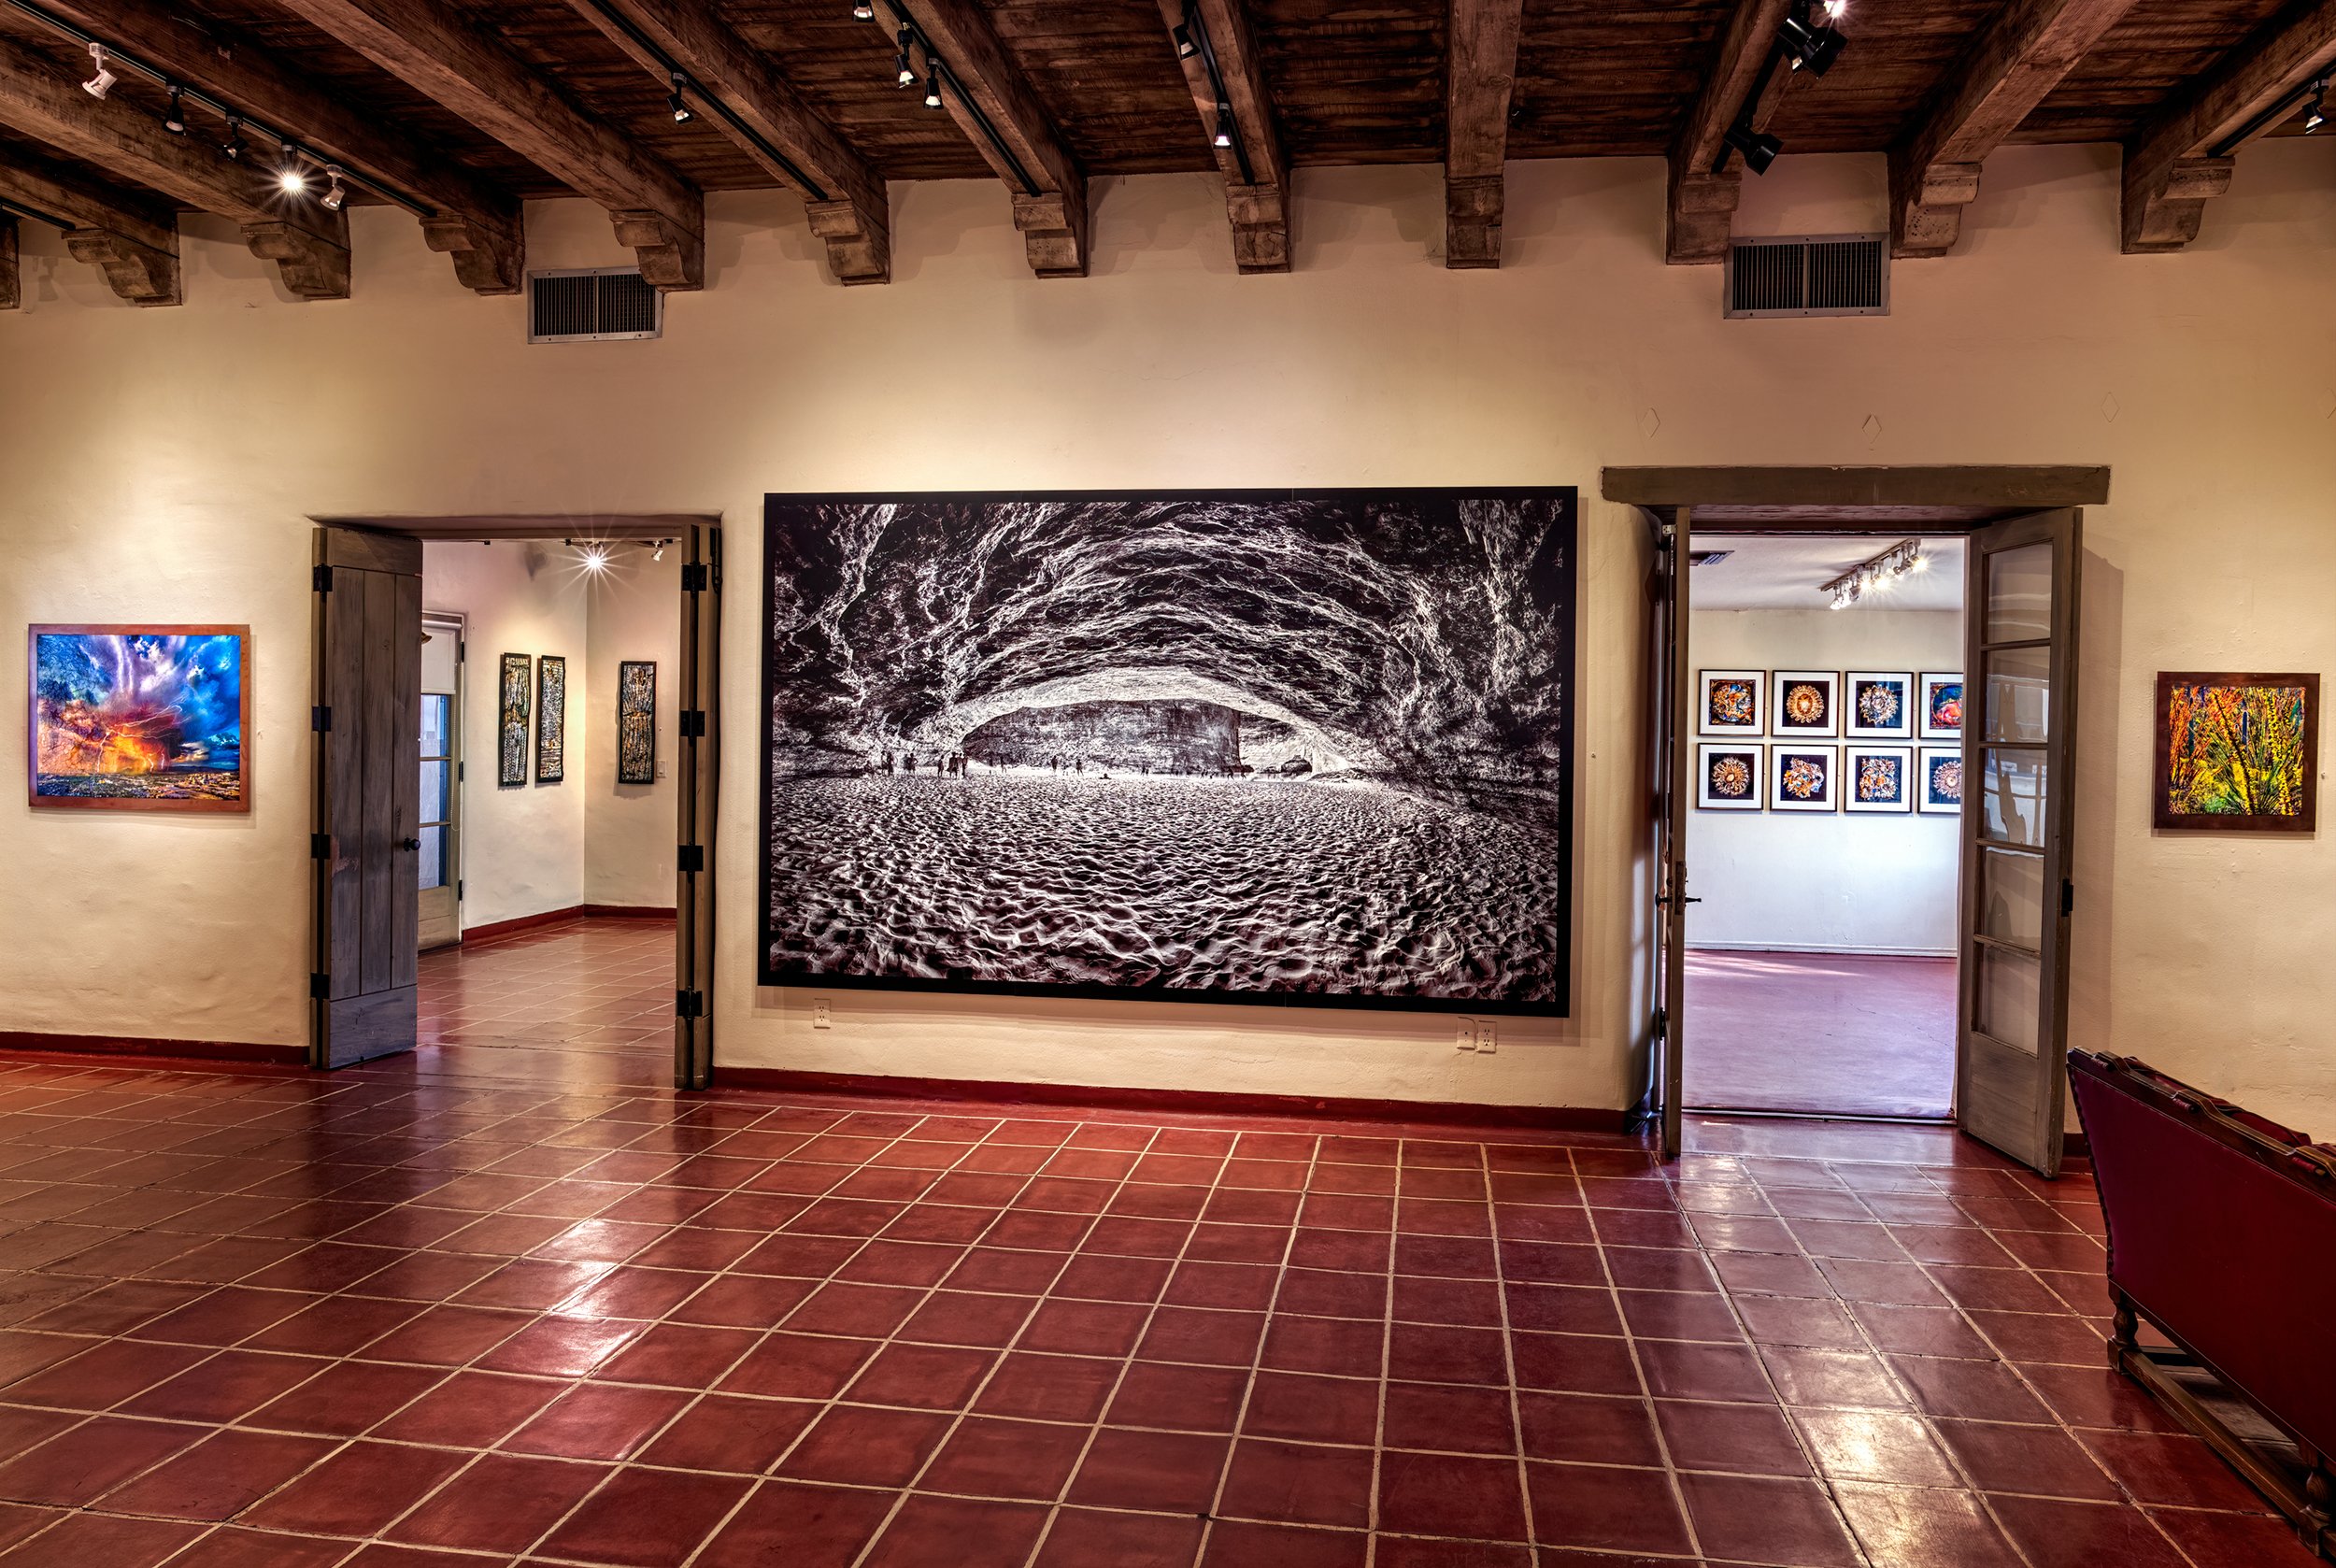 Tohono Chul Show "William Lesch:A Continuous Trail" through May 6